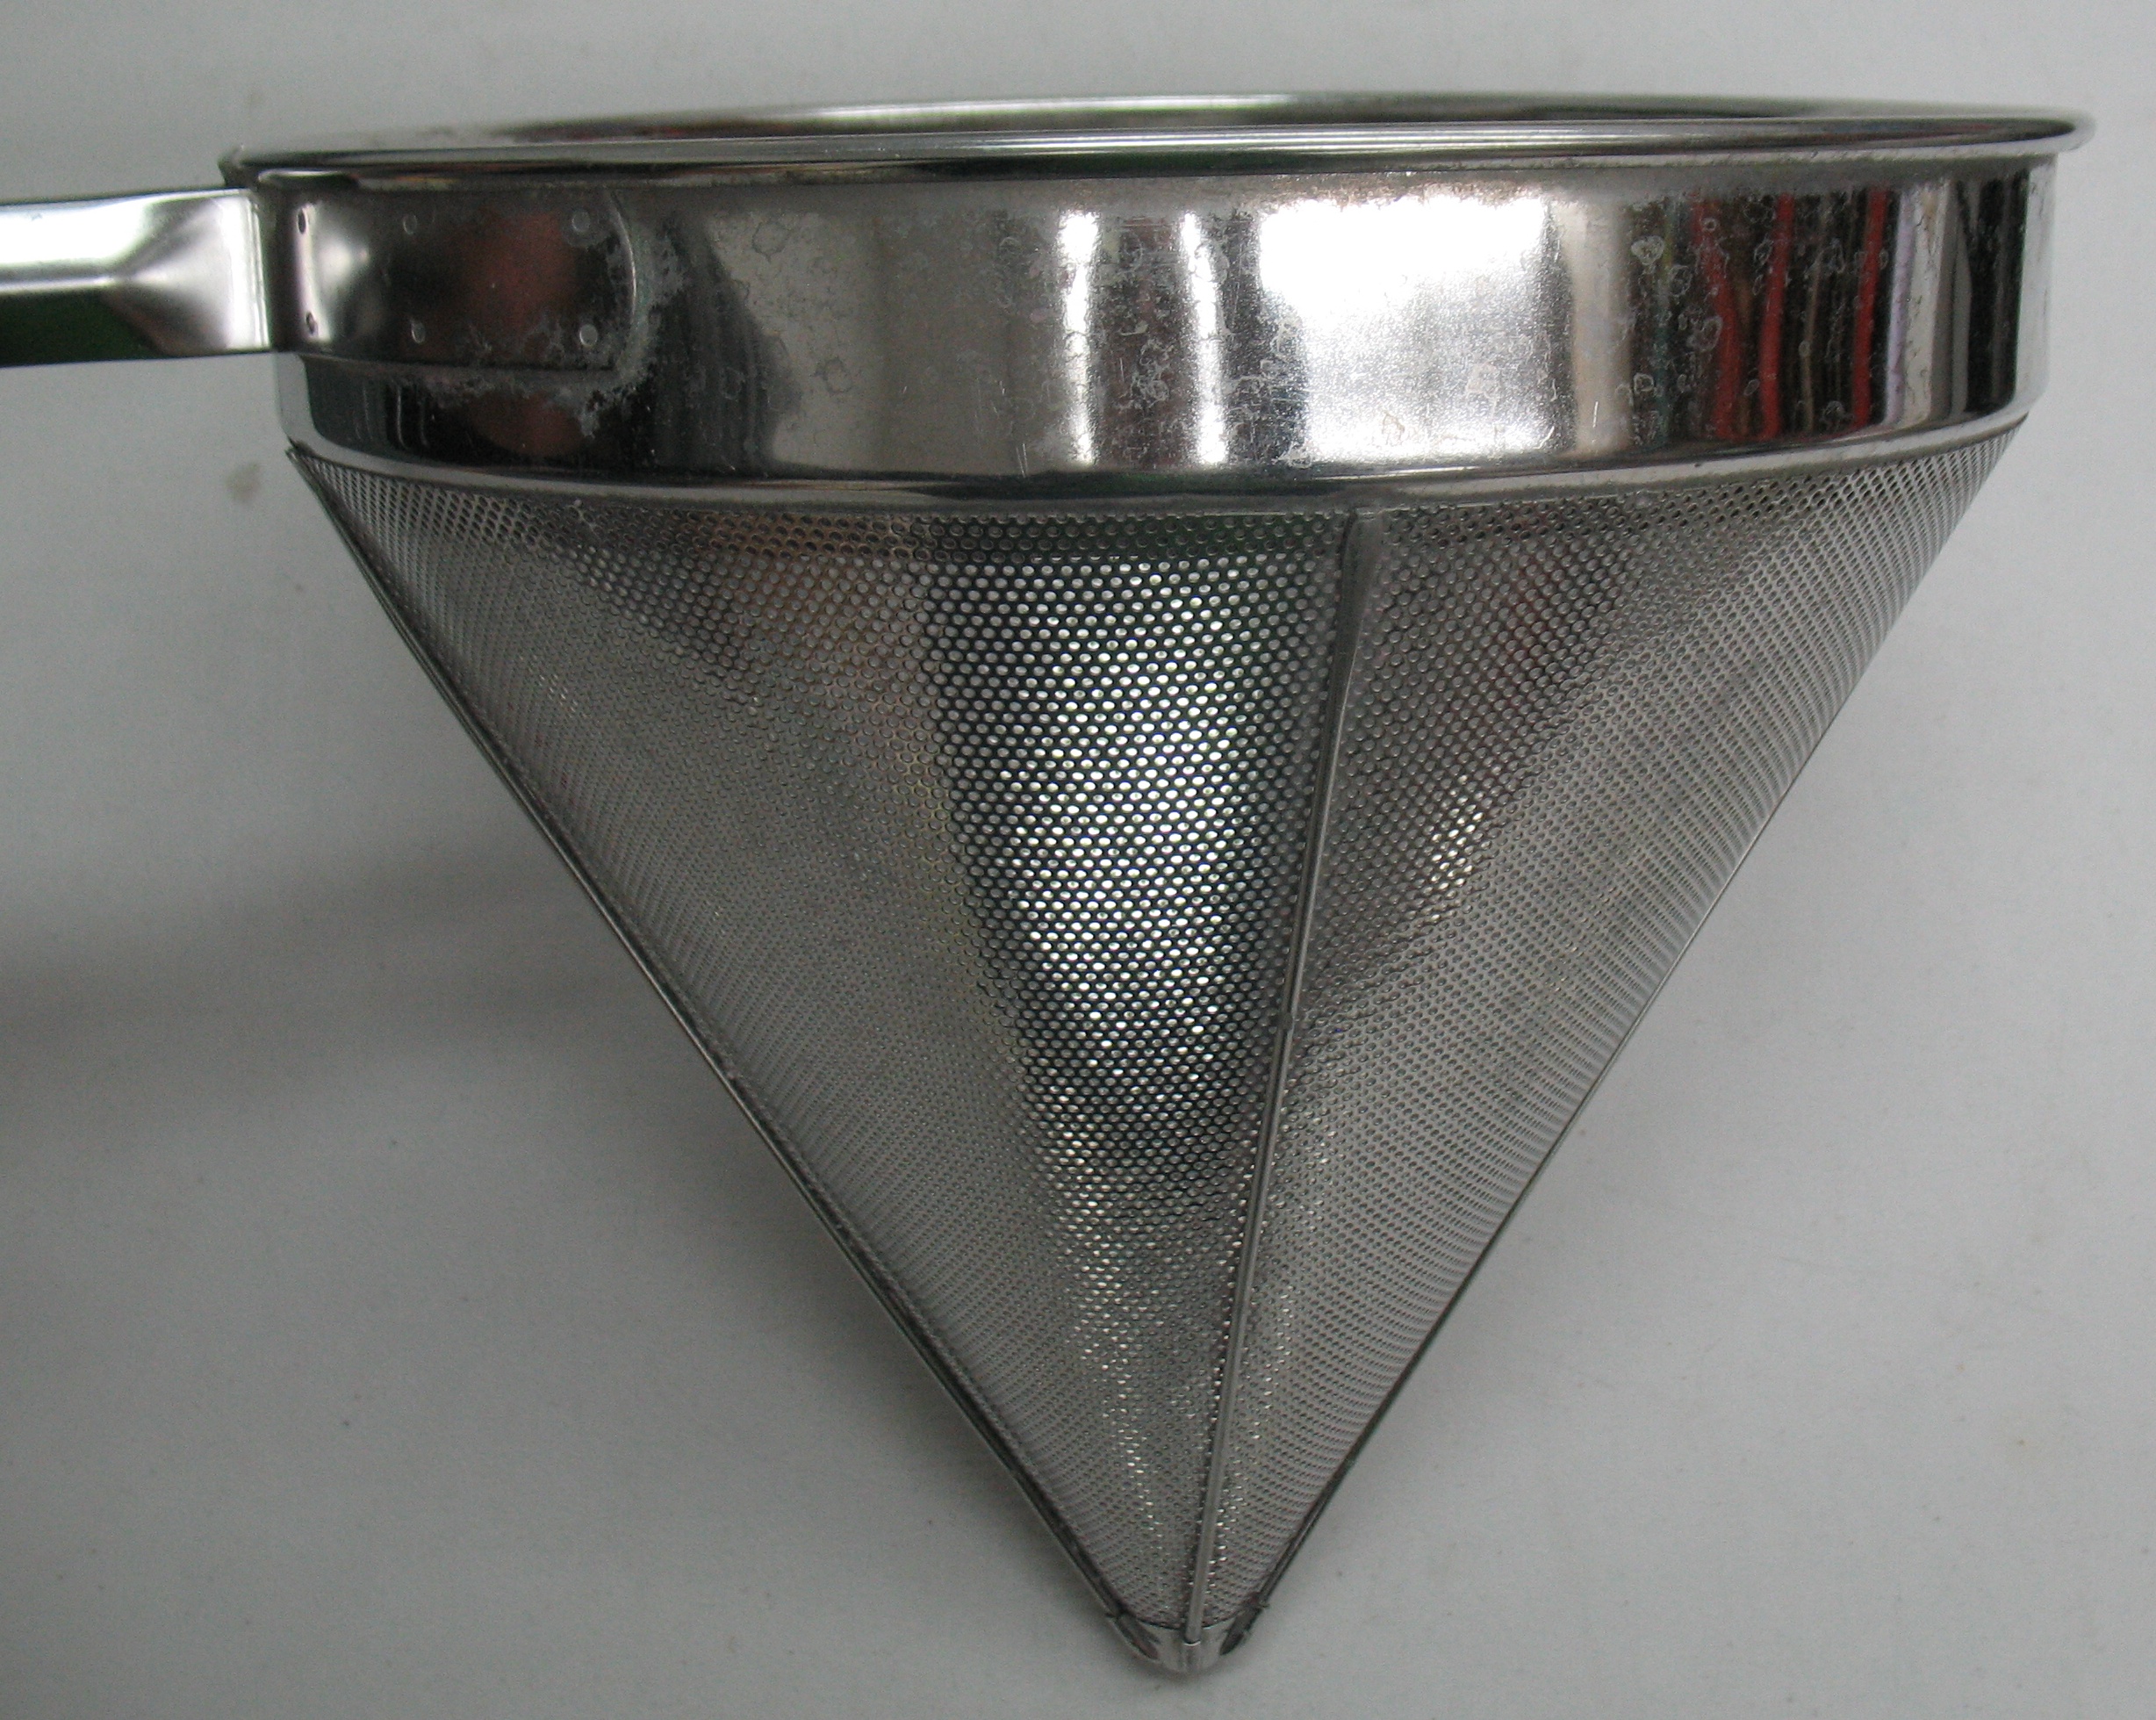 Side view of the large strainer. The perspective makes the cone appear shorter than it actually is.